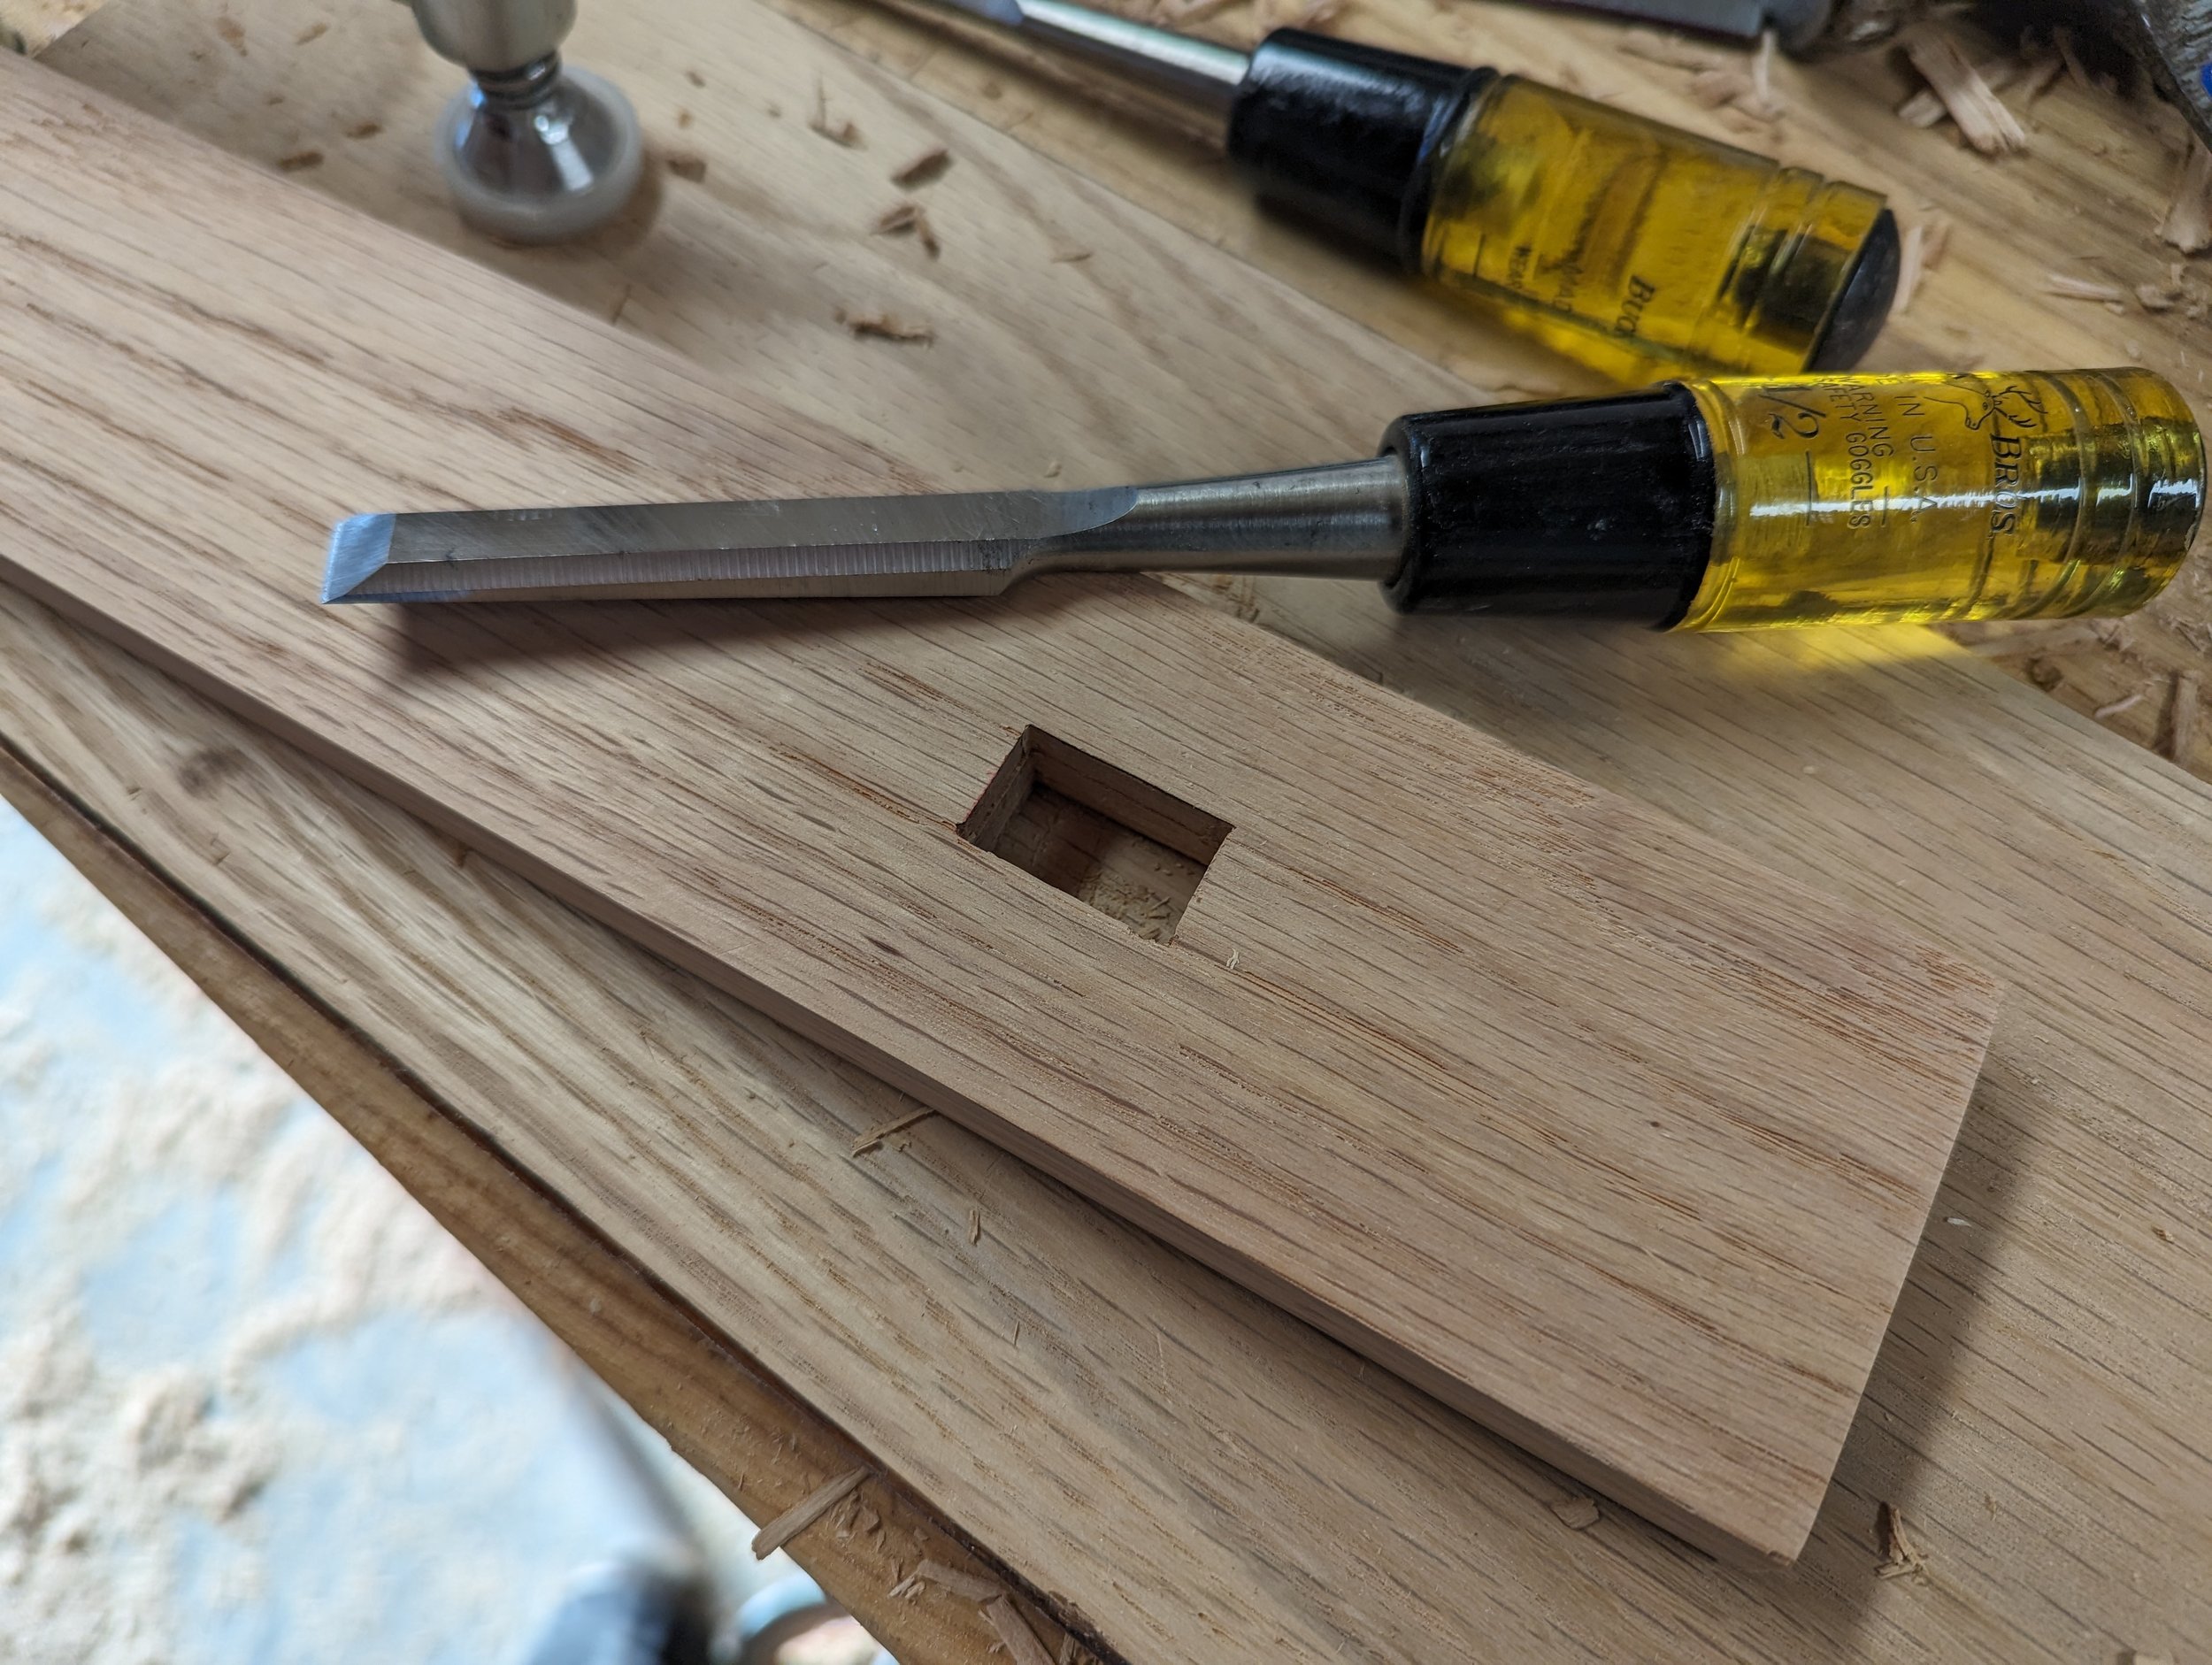  Two mortises were cut in each leg to insert the top and bottom cross members. A Forstner bit was used to drill out most of the mortise, while a chisel was used to cut out the remaining material. 